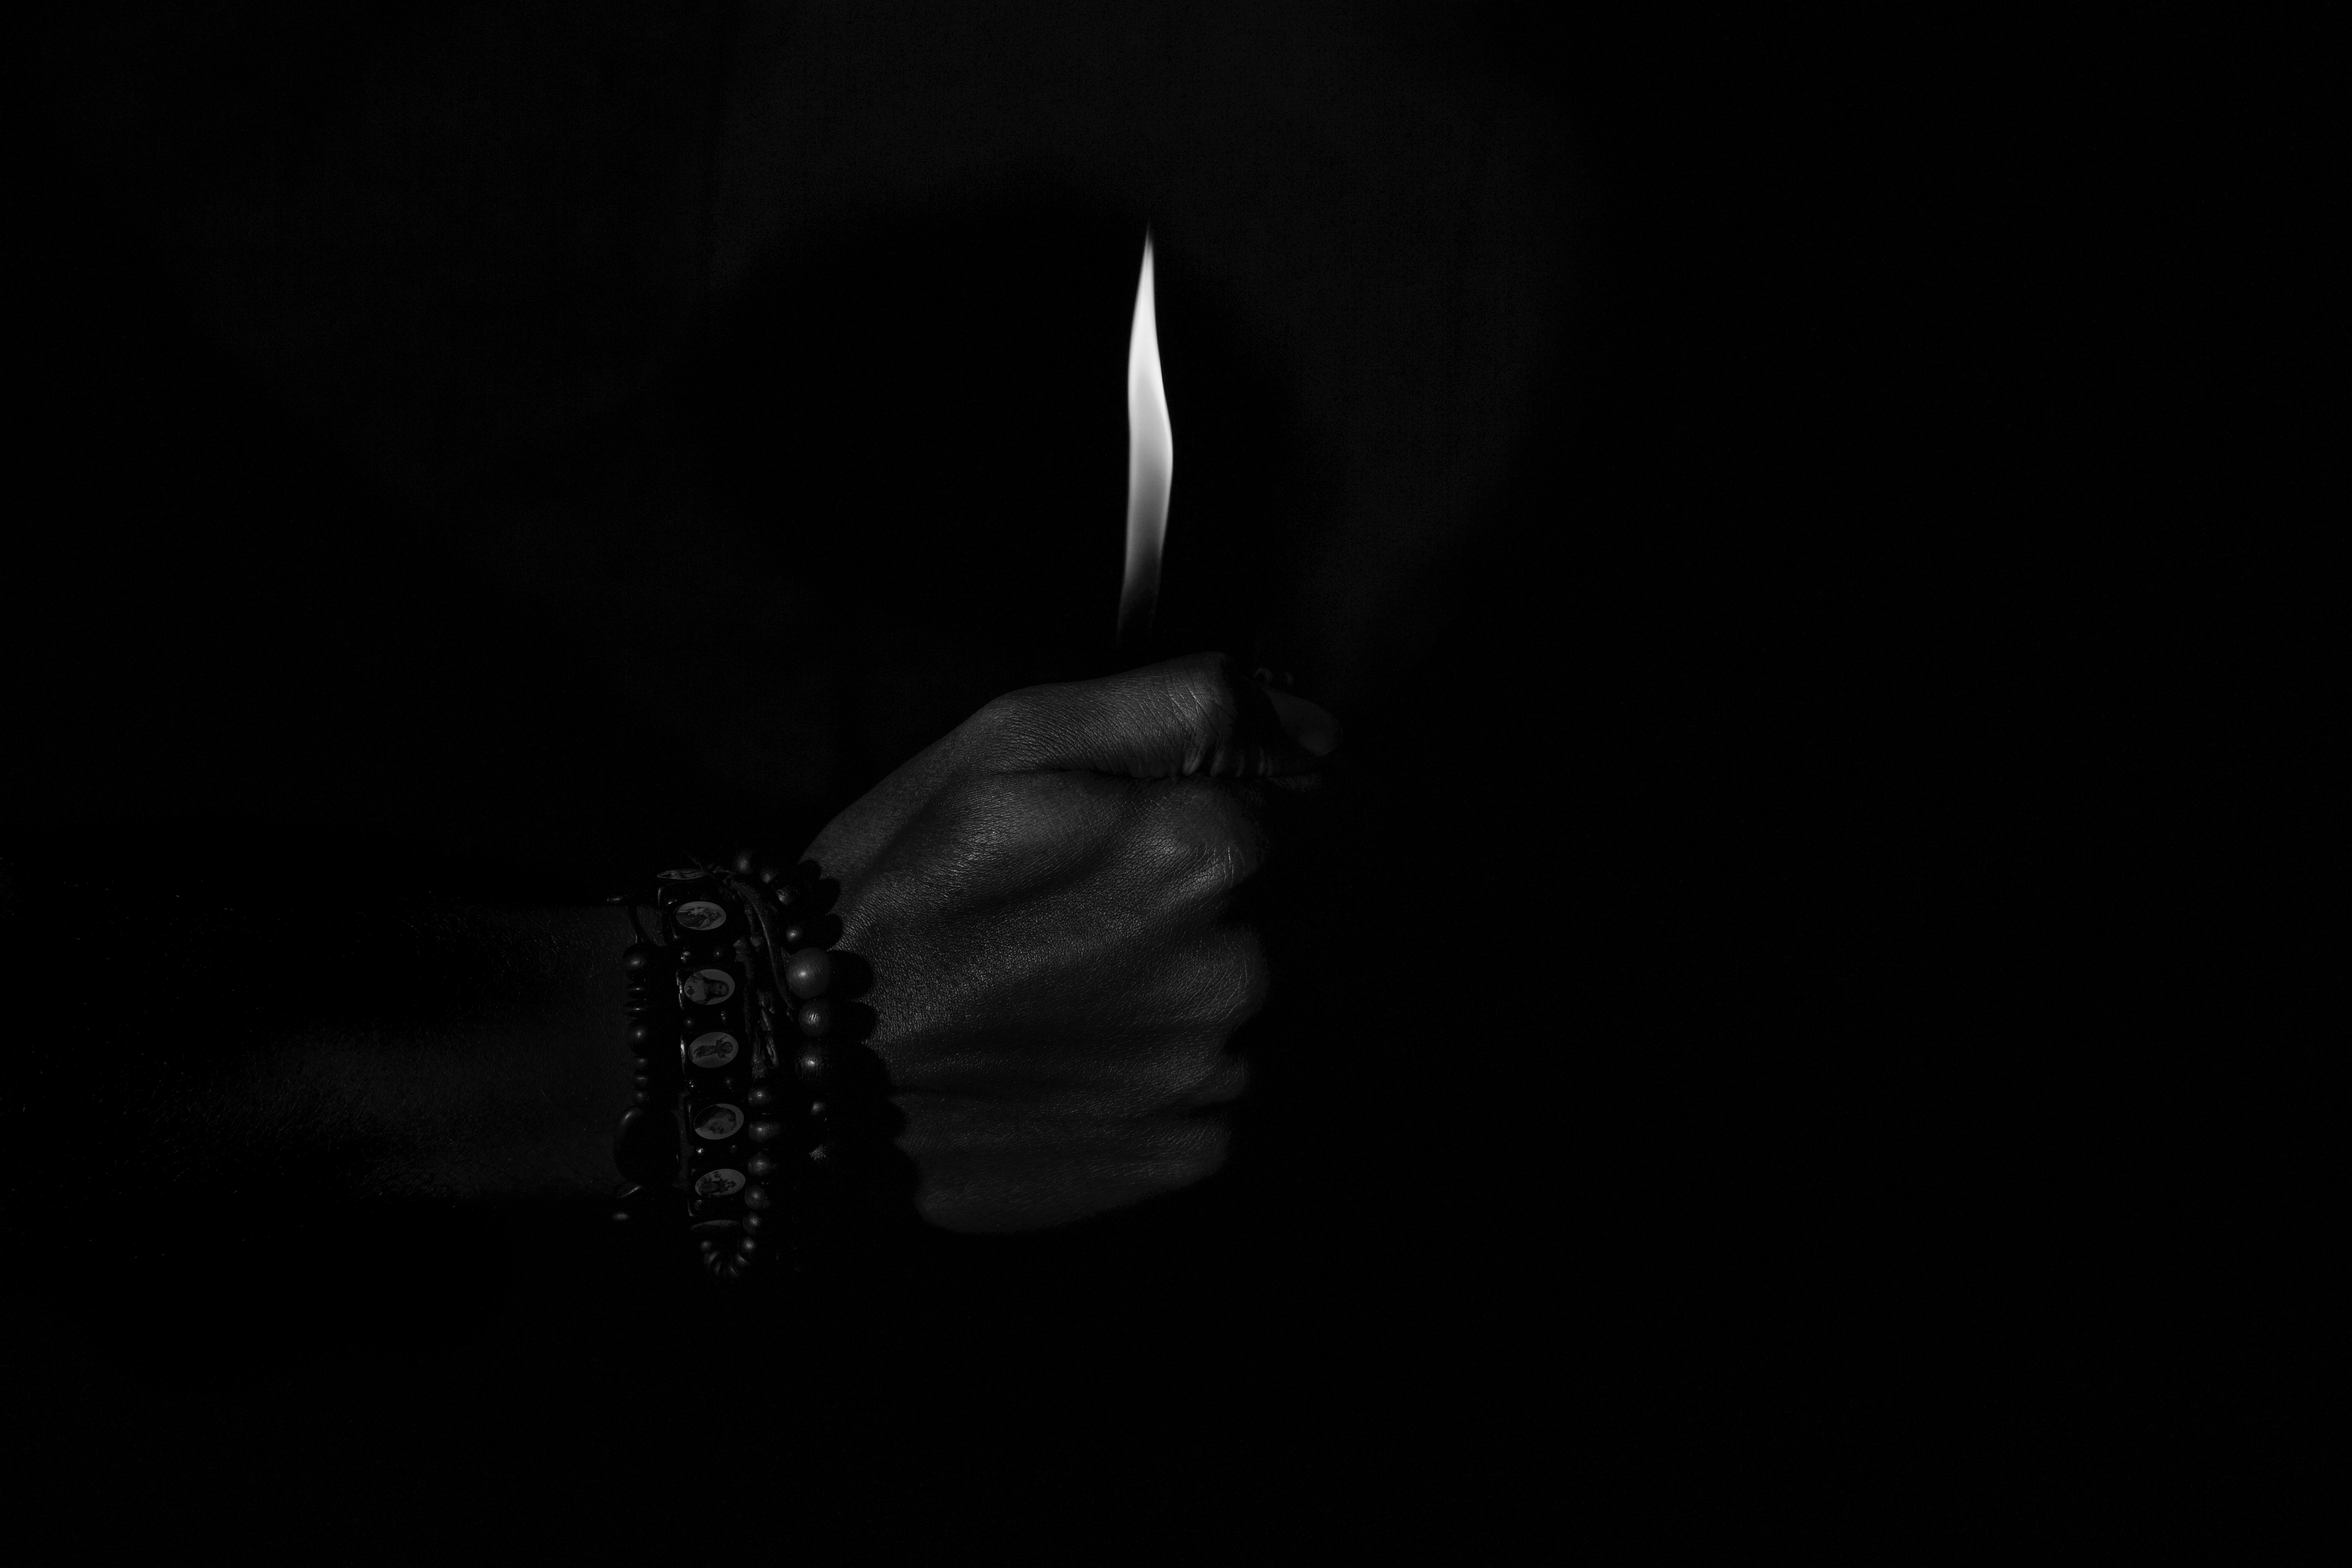 hands, chb, black, bw, candle